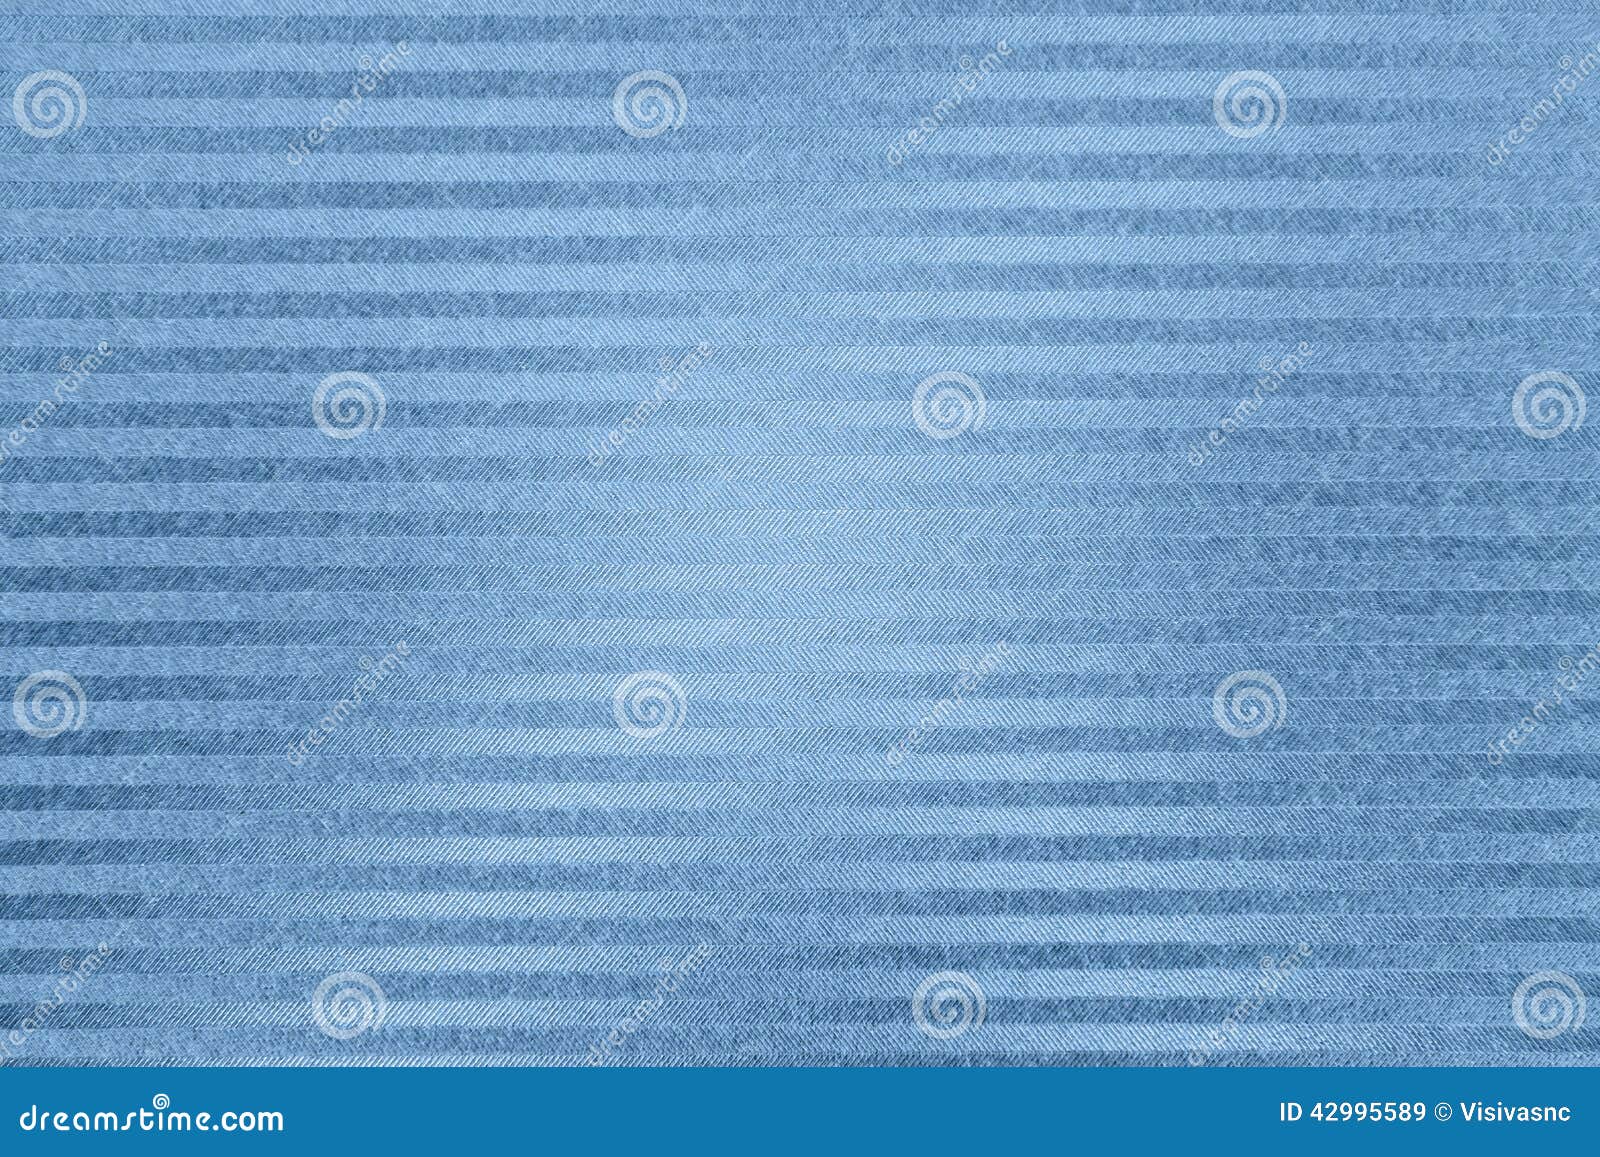 textured paper background with blue surface effects